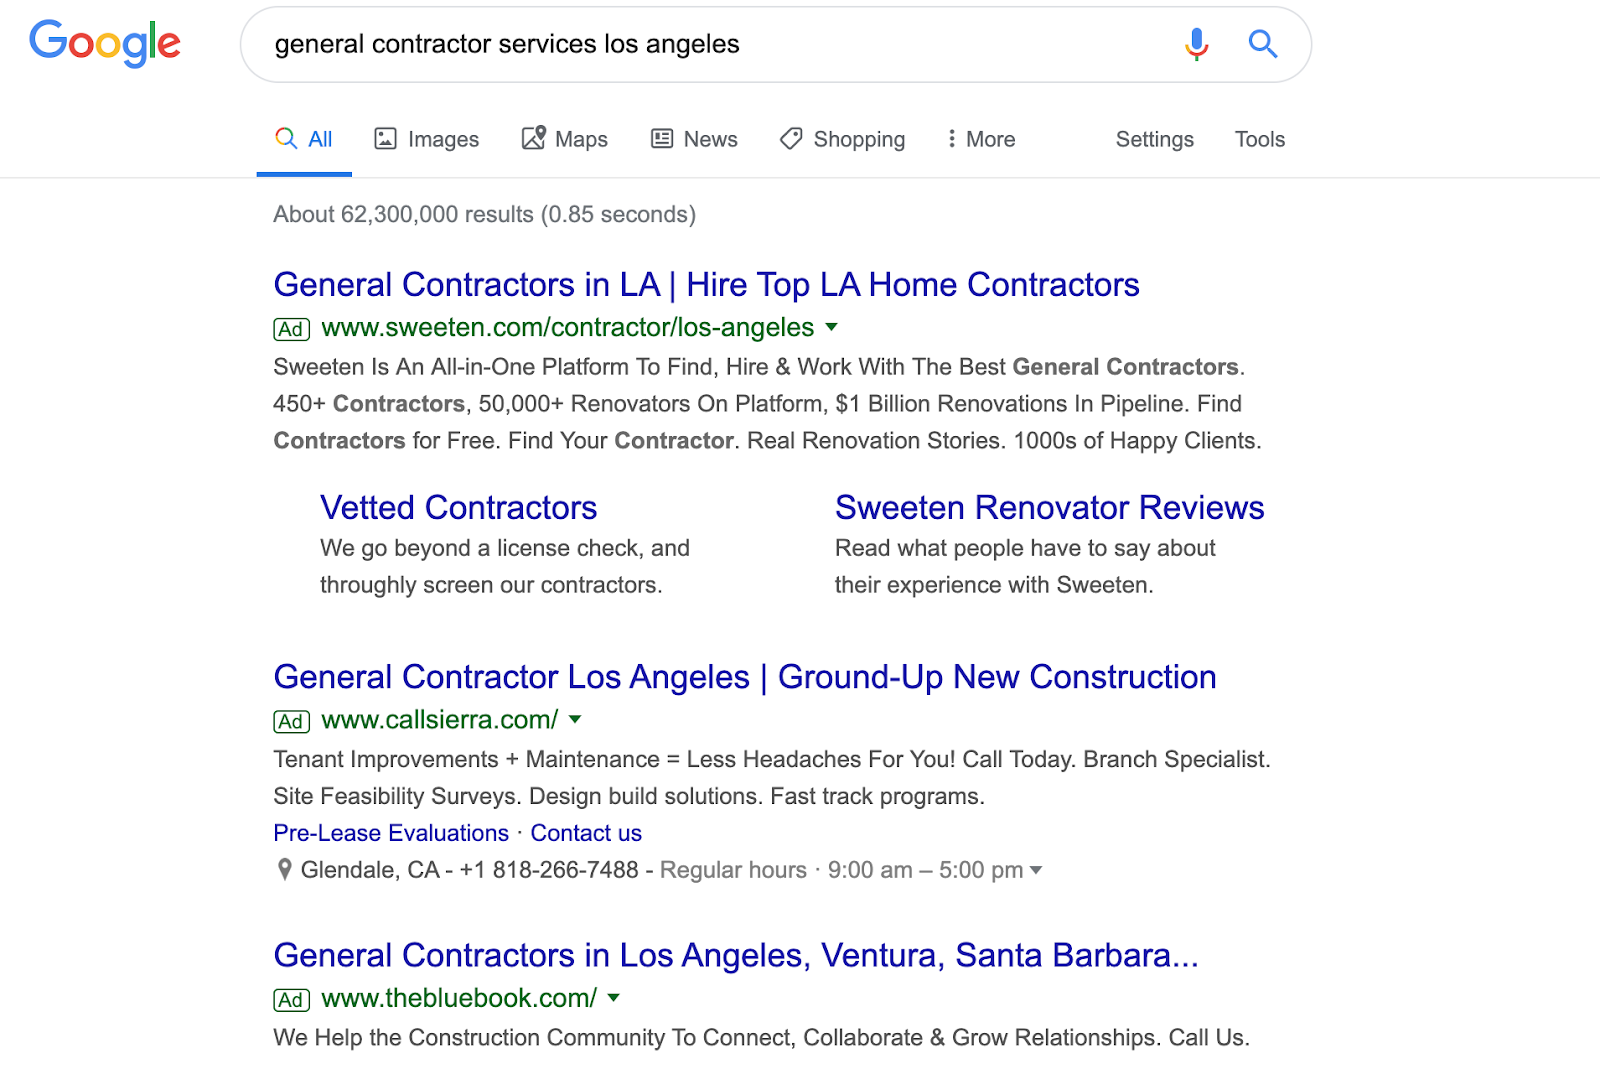 Google Paid Ads Search Results Screenshot